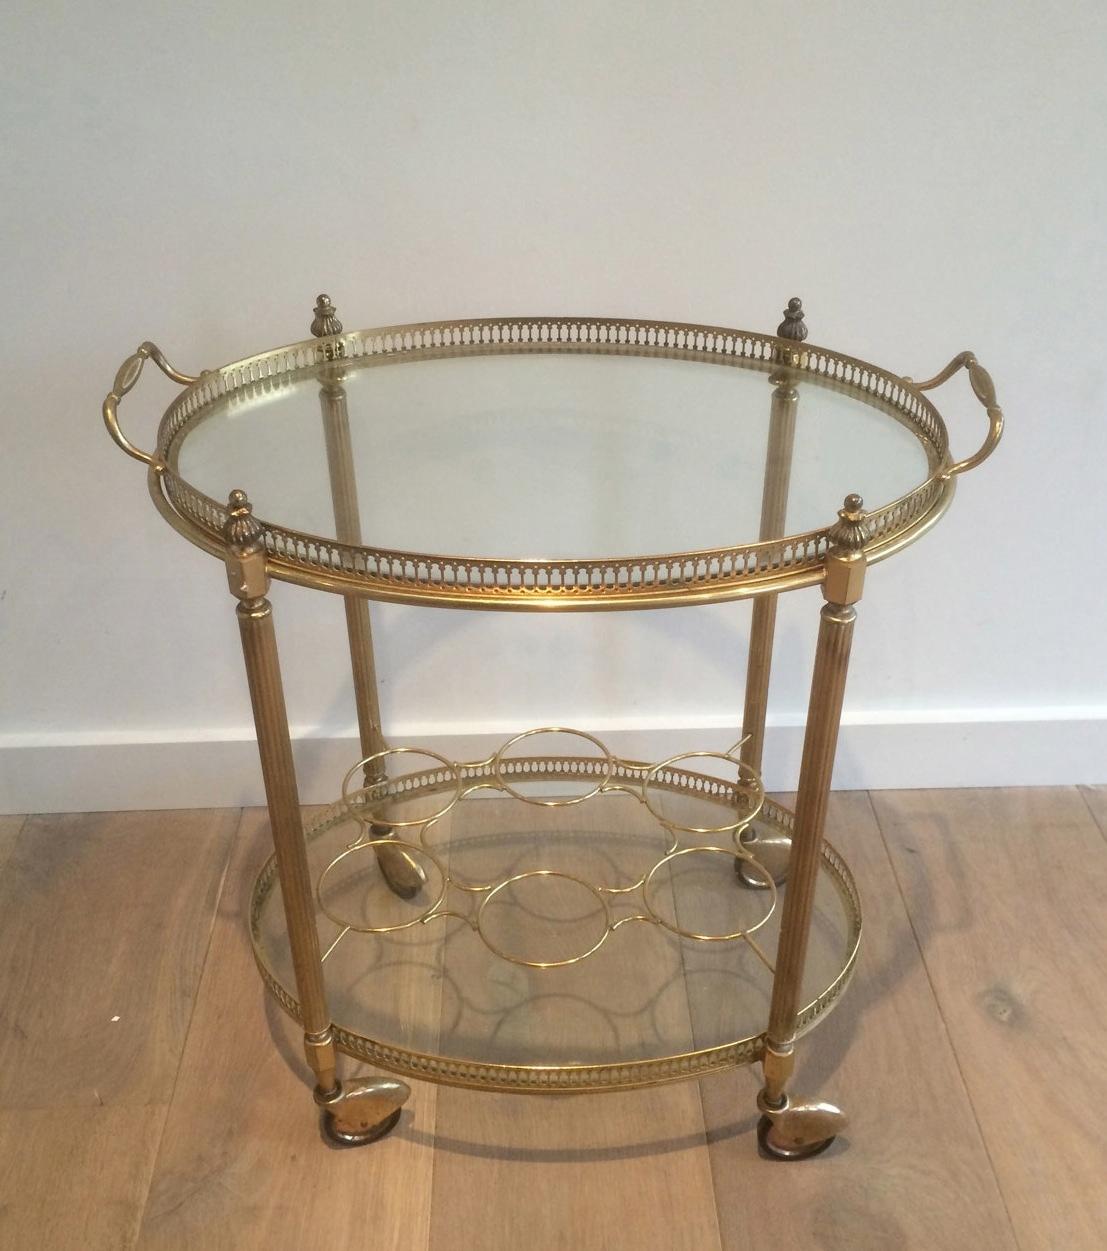 This elegant oval drinks trolley is made of brass with glass shelves. Top tray is removable and there is a bottles holder on the bootom shelf. This is a French work in the style of Maison Jansen. Circa 1940